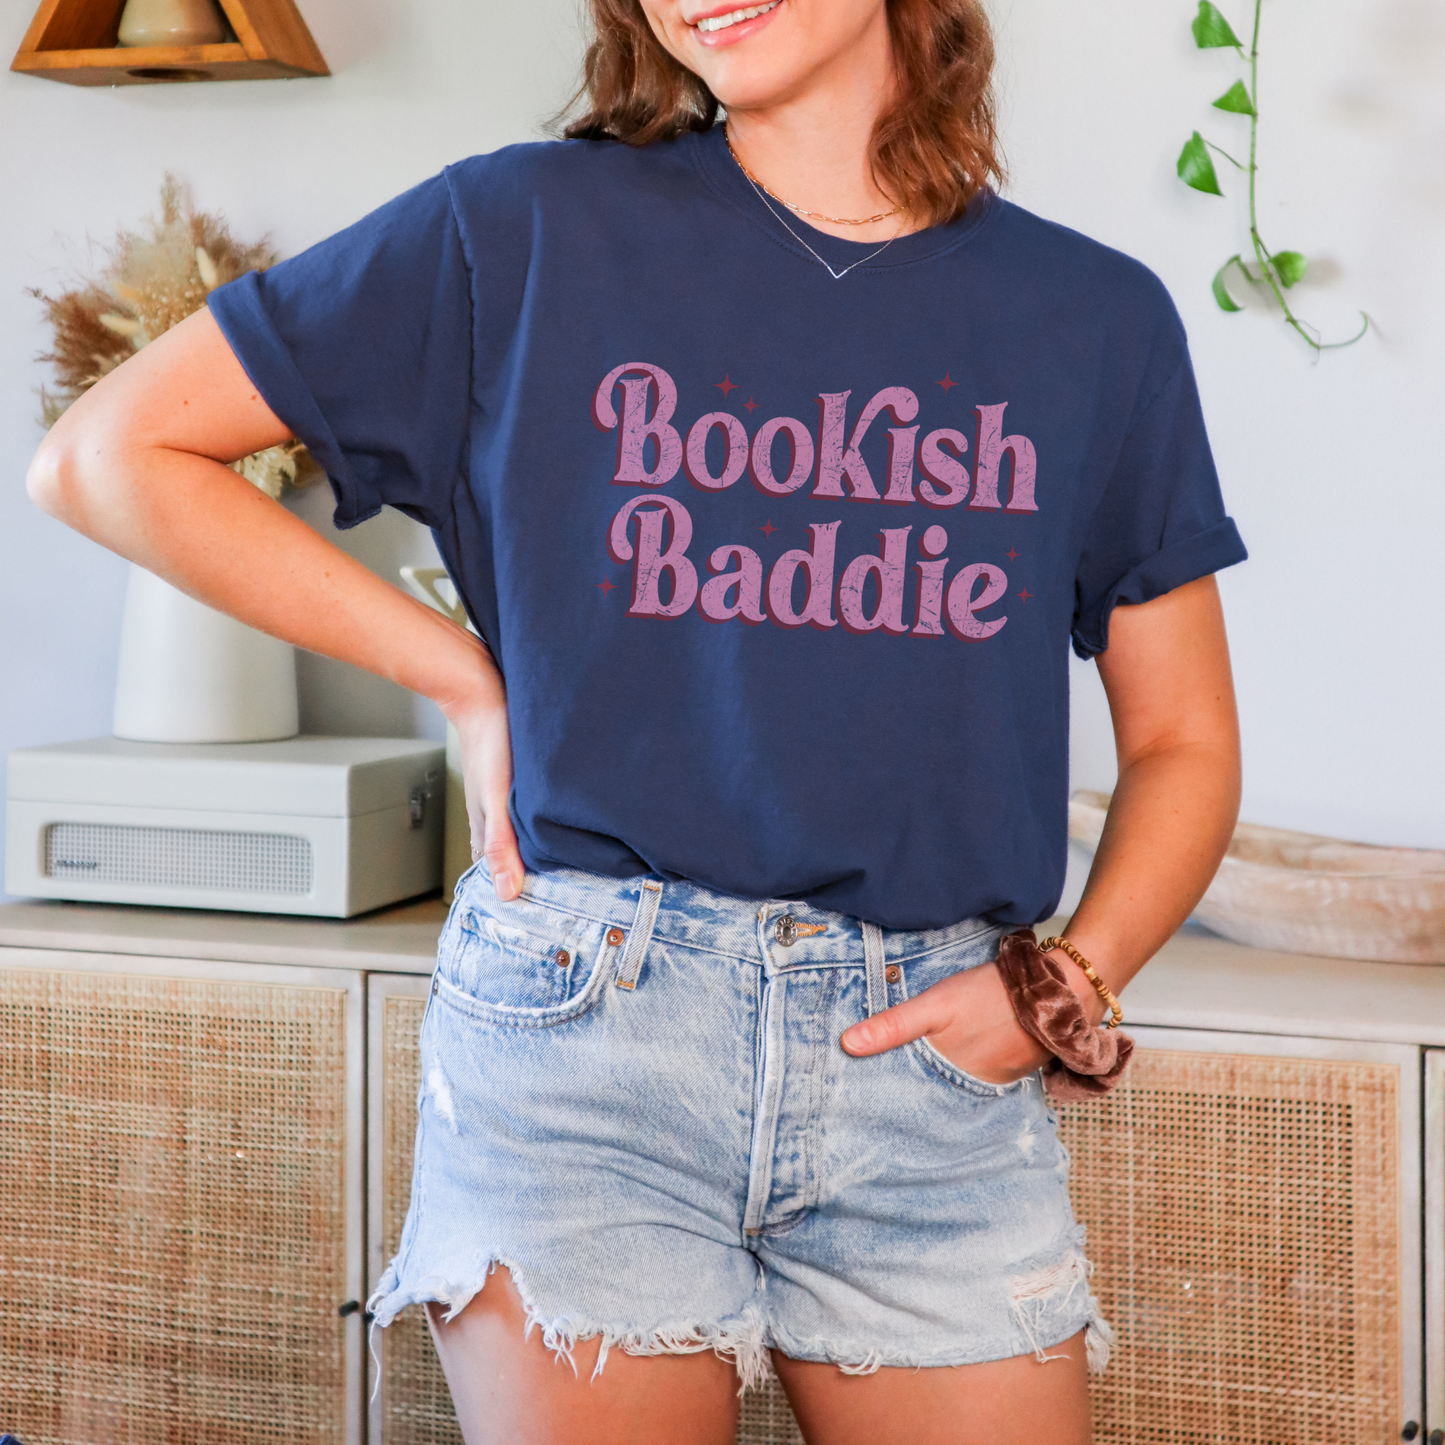 The striking pink font stands out in style, making a bold statement that declares your love for books with a fun and fashion-forward flair.